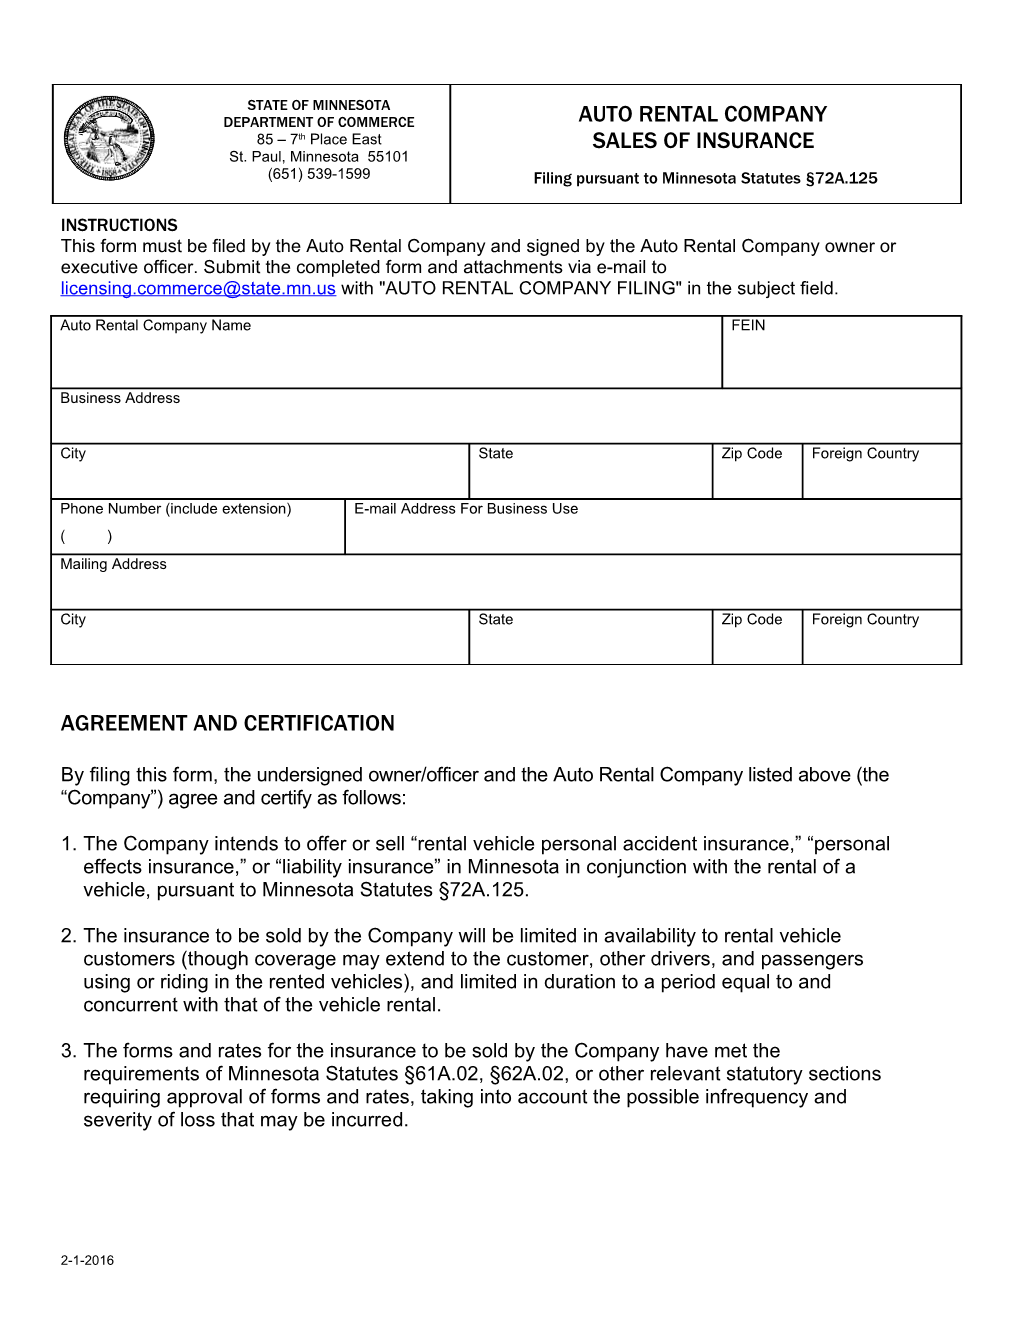 This Form Must Be Filed by the Auto Rental Company and Signed by the Auto Rental Company